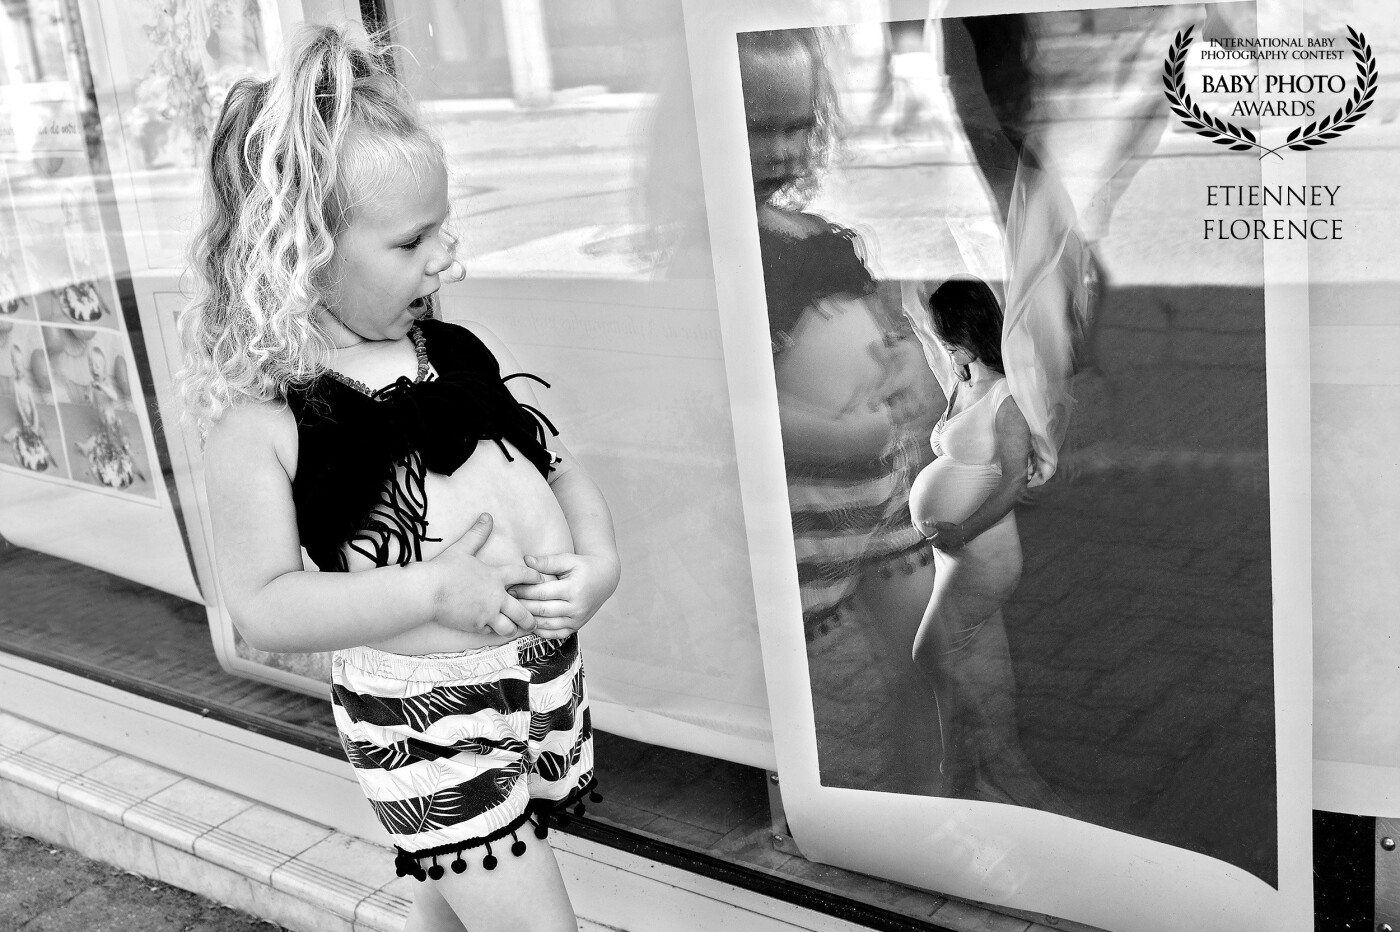 This little girl was attempting to replicate the pose of the pregnant woman on display in the window of my photography studio while I was busy photographing her little brother. I saw her through the window and rushed to shoot her.